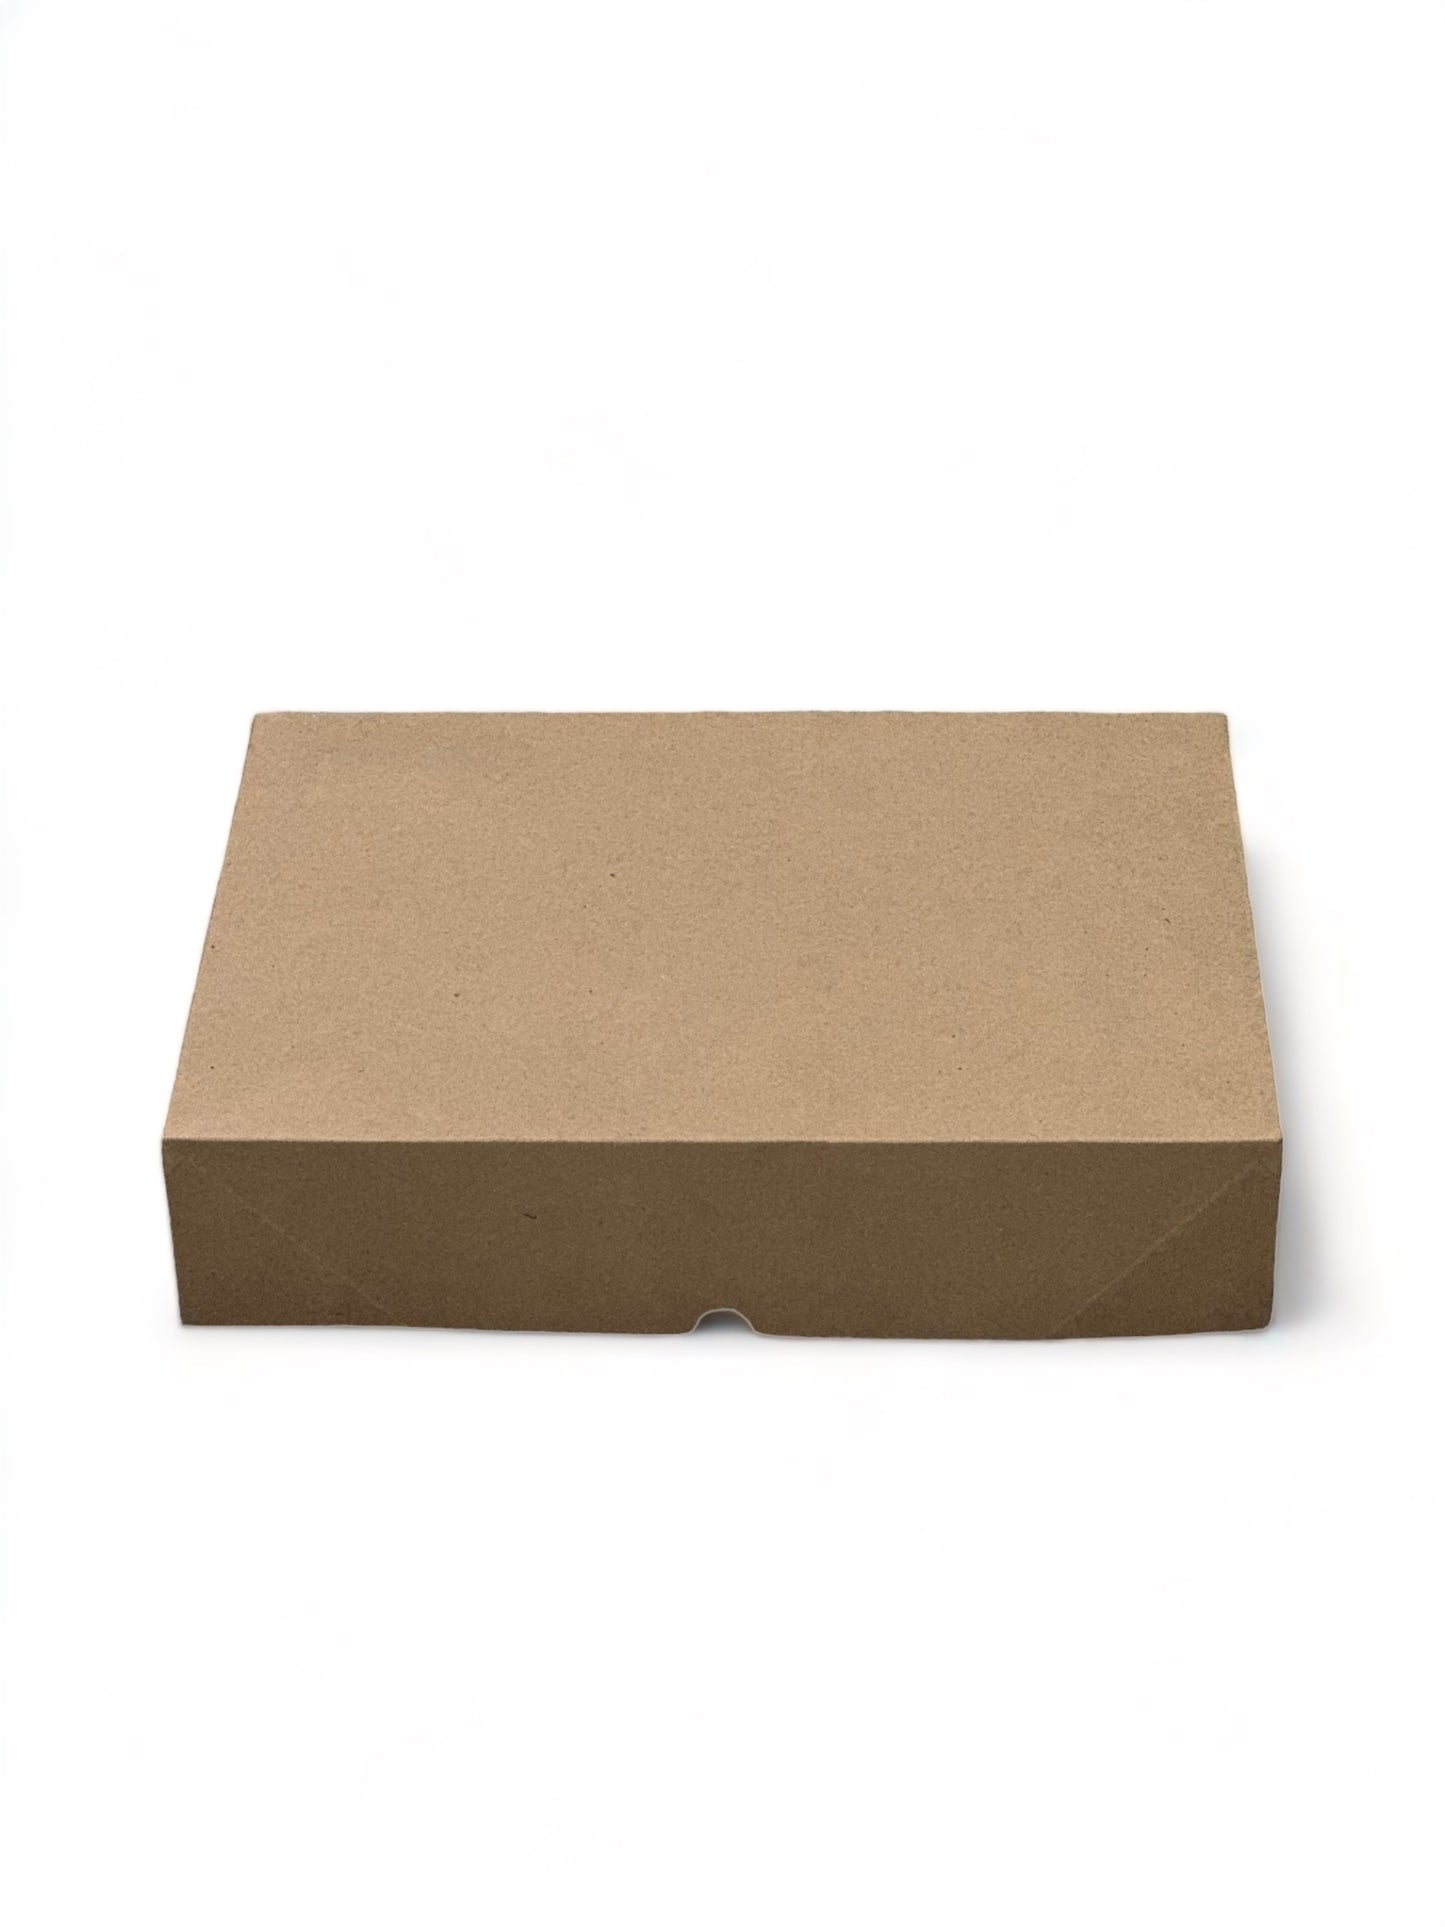 Donut/Muffin Top Box - 16.5X12.5X3.5 - 200 Pieces